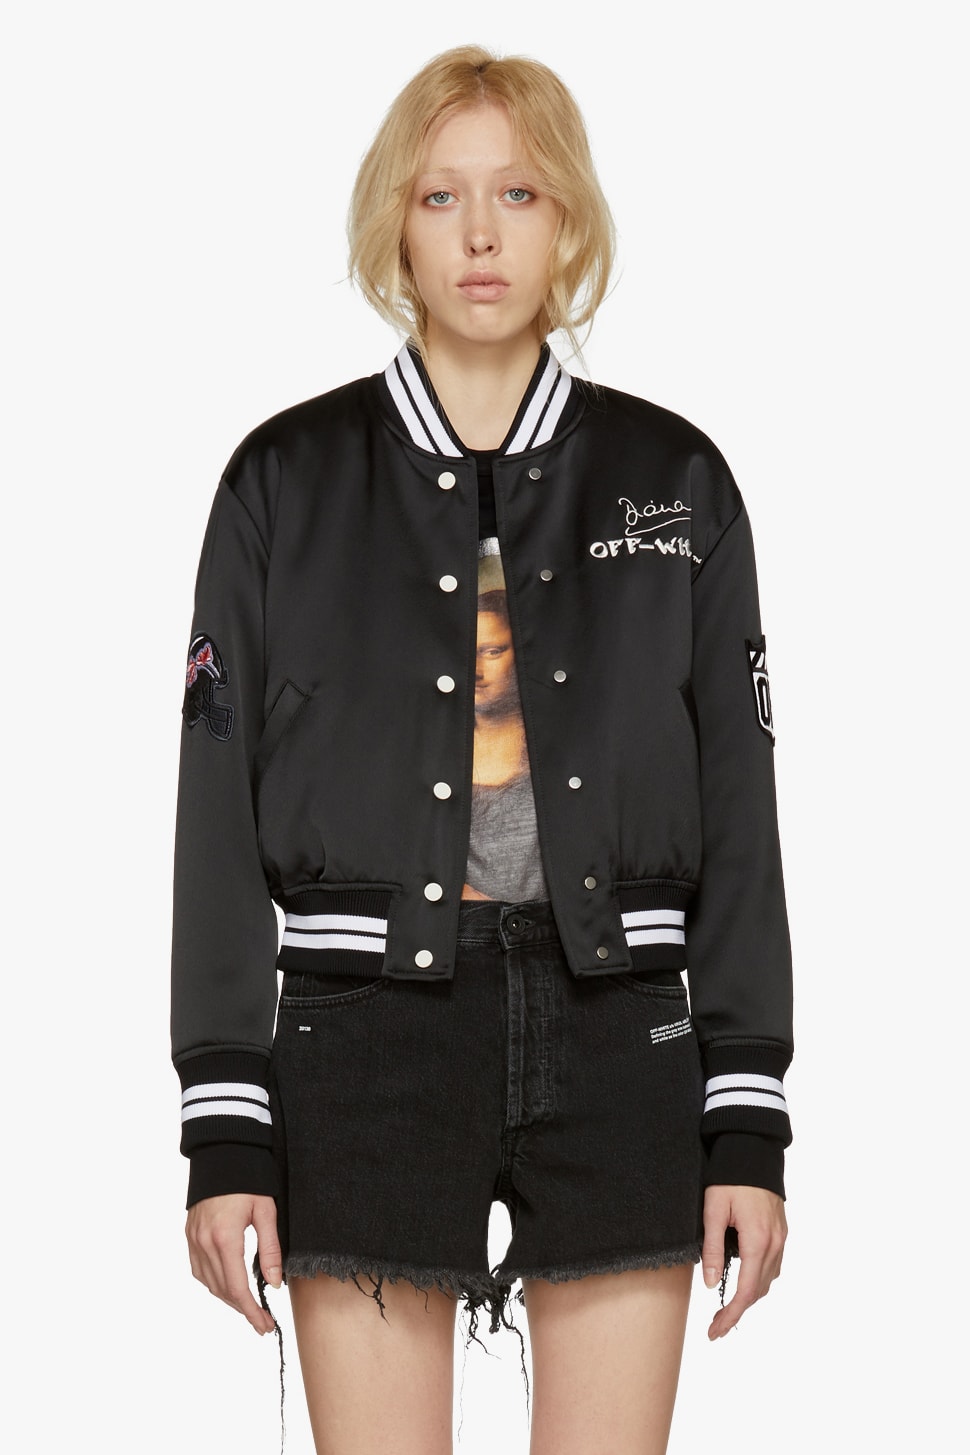 Off-White New Arrivals Spring Collection Silk Bomber Jacket